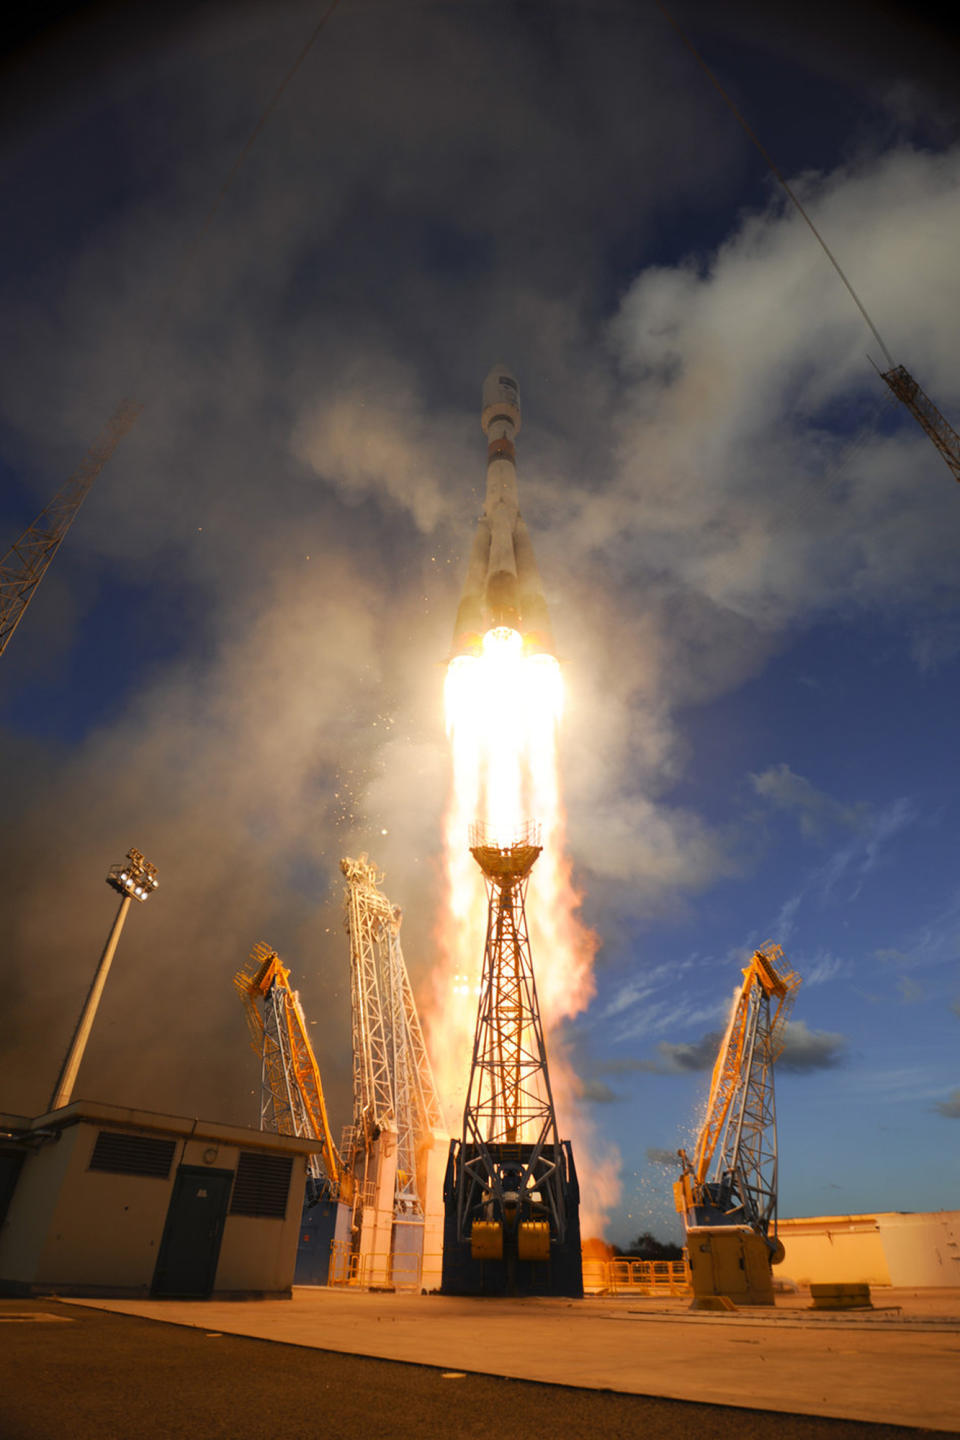 This image publicly provided by the European Space Agency ESA, shows Sentinel-1A satellite as it lifts off from Europe’s Spaceport in Kourou, French Guiana, on Thursday, April 3, 2014. ESA said Friday, April 4, 2014, it has successfully launched the first in a series of satellites that will form the nucleus of its new Copernicus monitoring system, which is aimed at providing better and quicker information about natural disasters and other catastrophes. (AP Photo/European Space Agency, ESA/Stephane Corvaja) MANDATORY CREDIT